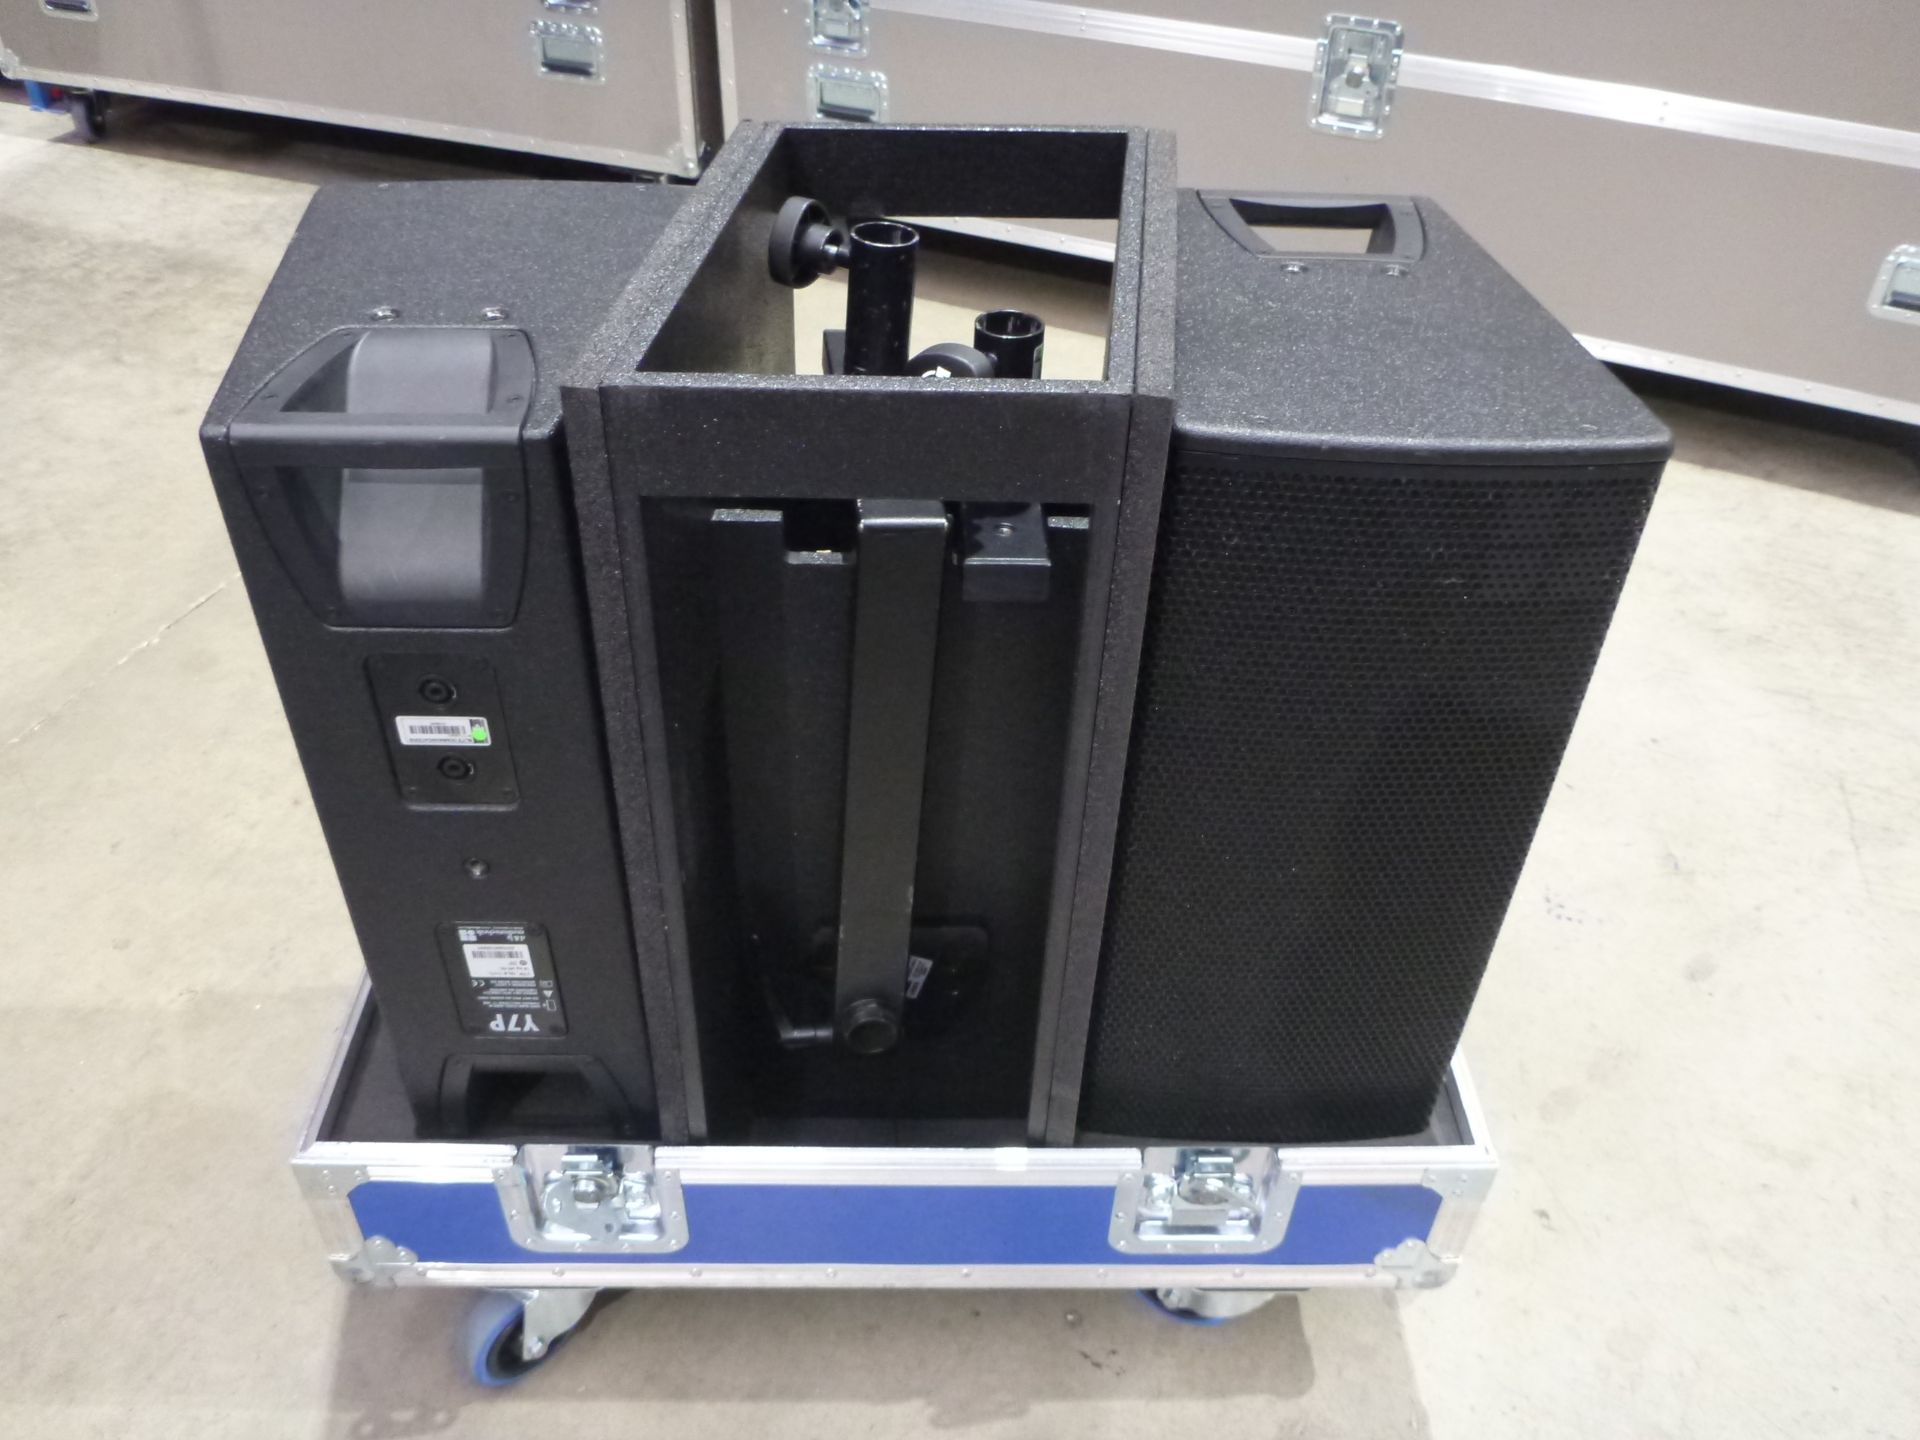 D & B Audiotecknik Y7P Loudspeakers (Pair) In flight case with flying frame, top hat and safety